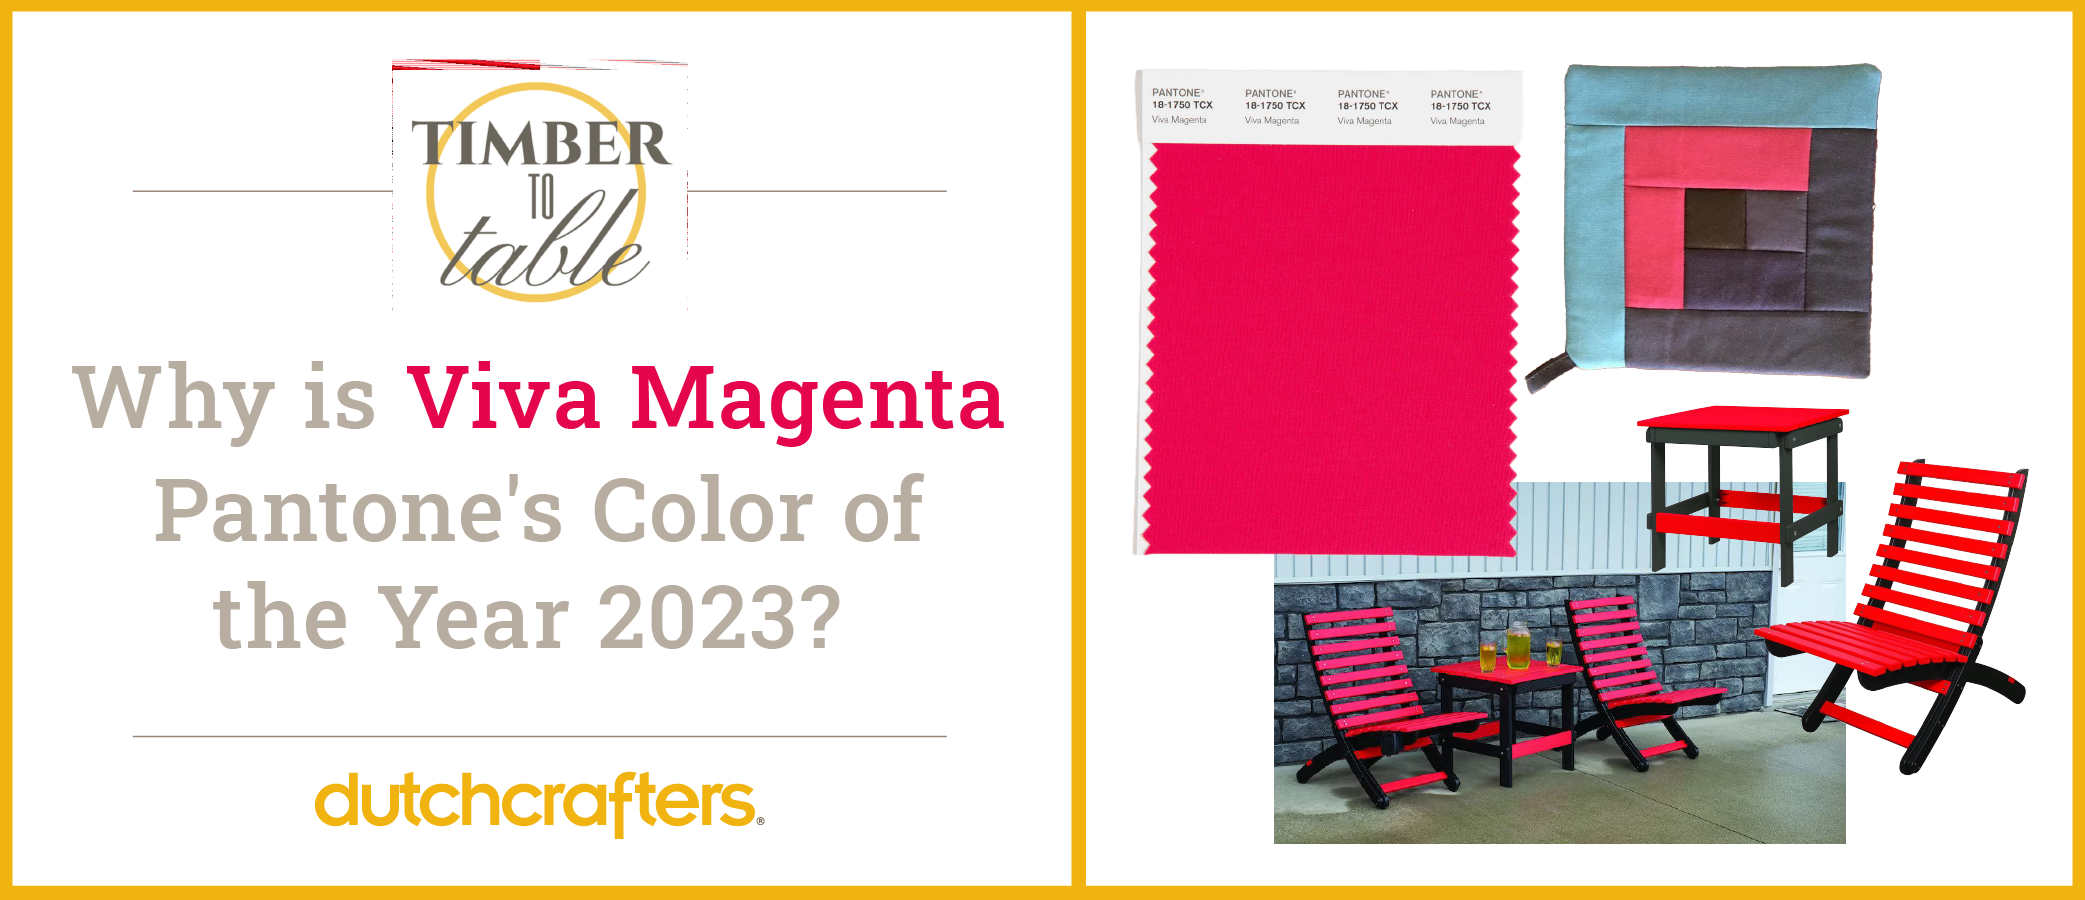 Pantone's 2023 Color of the Year Is Viva Magenta - The New York Times